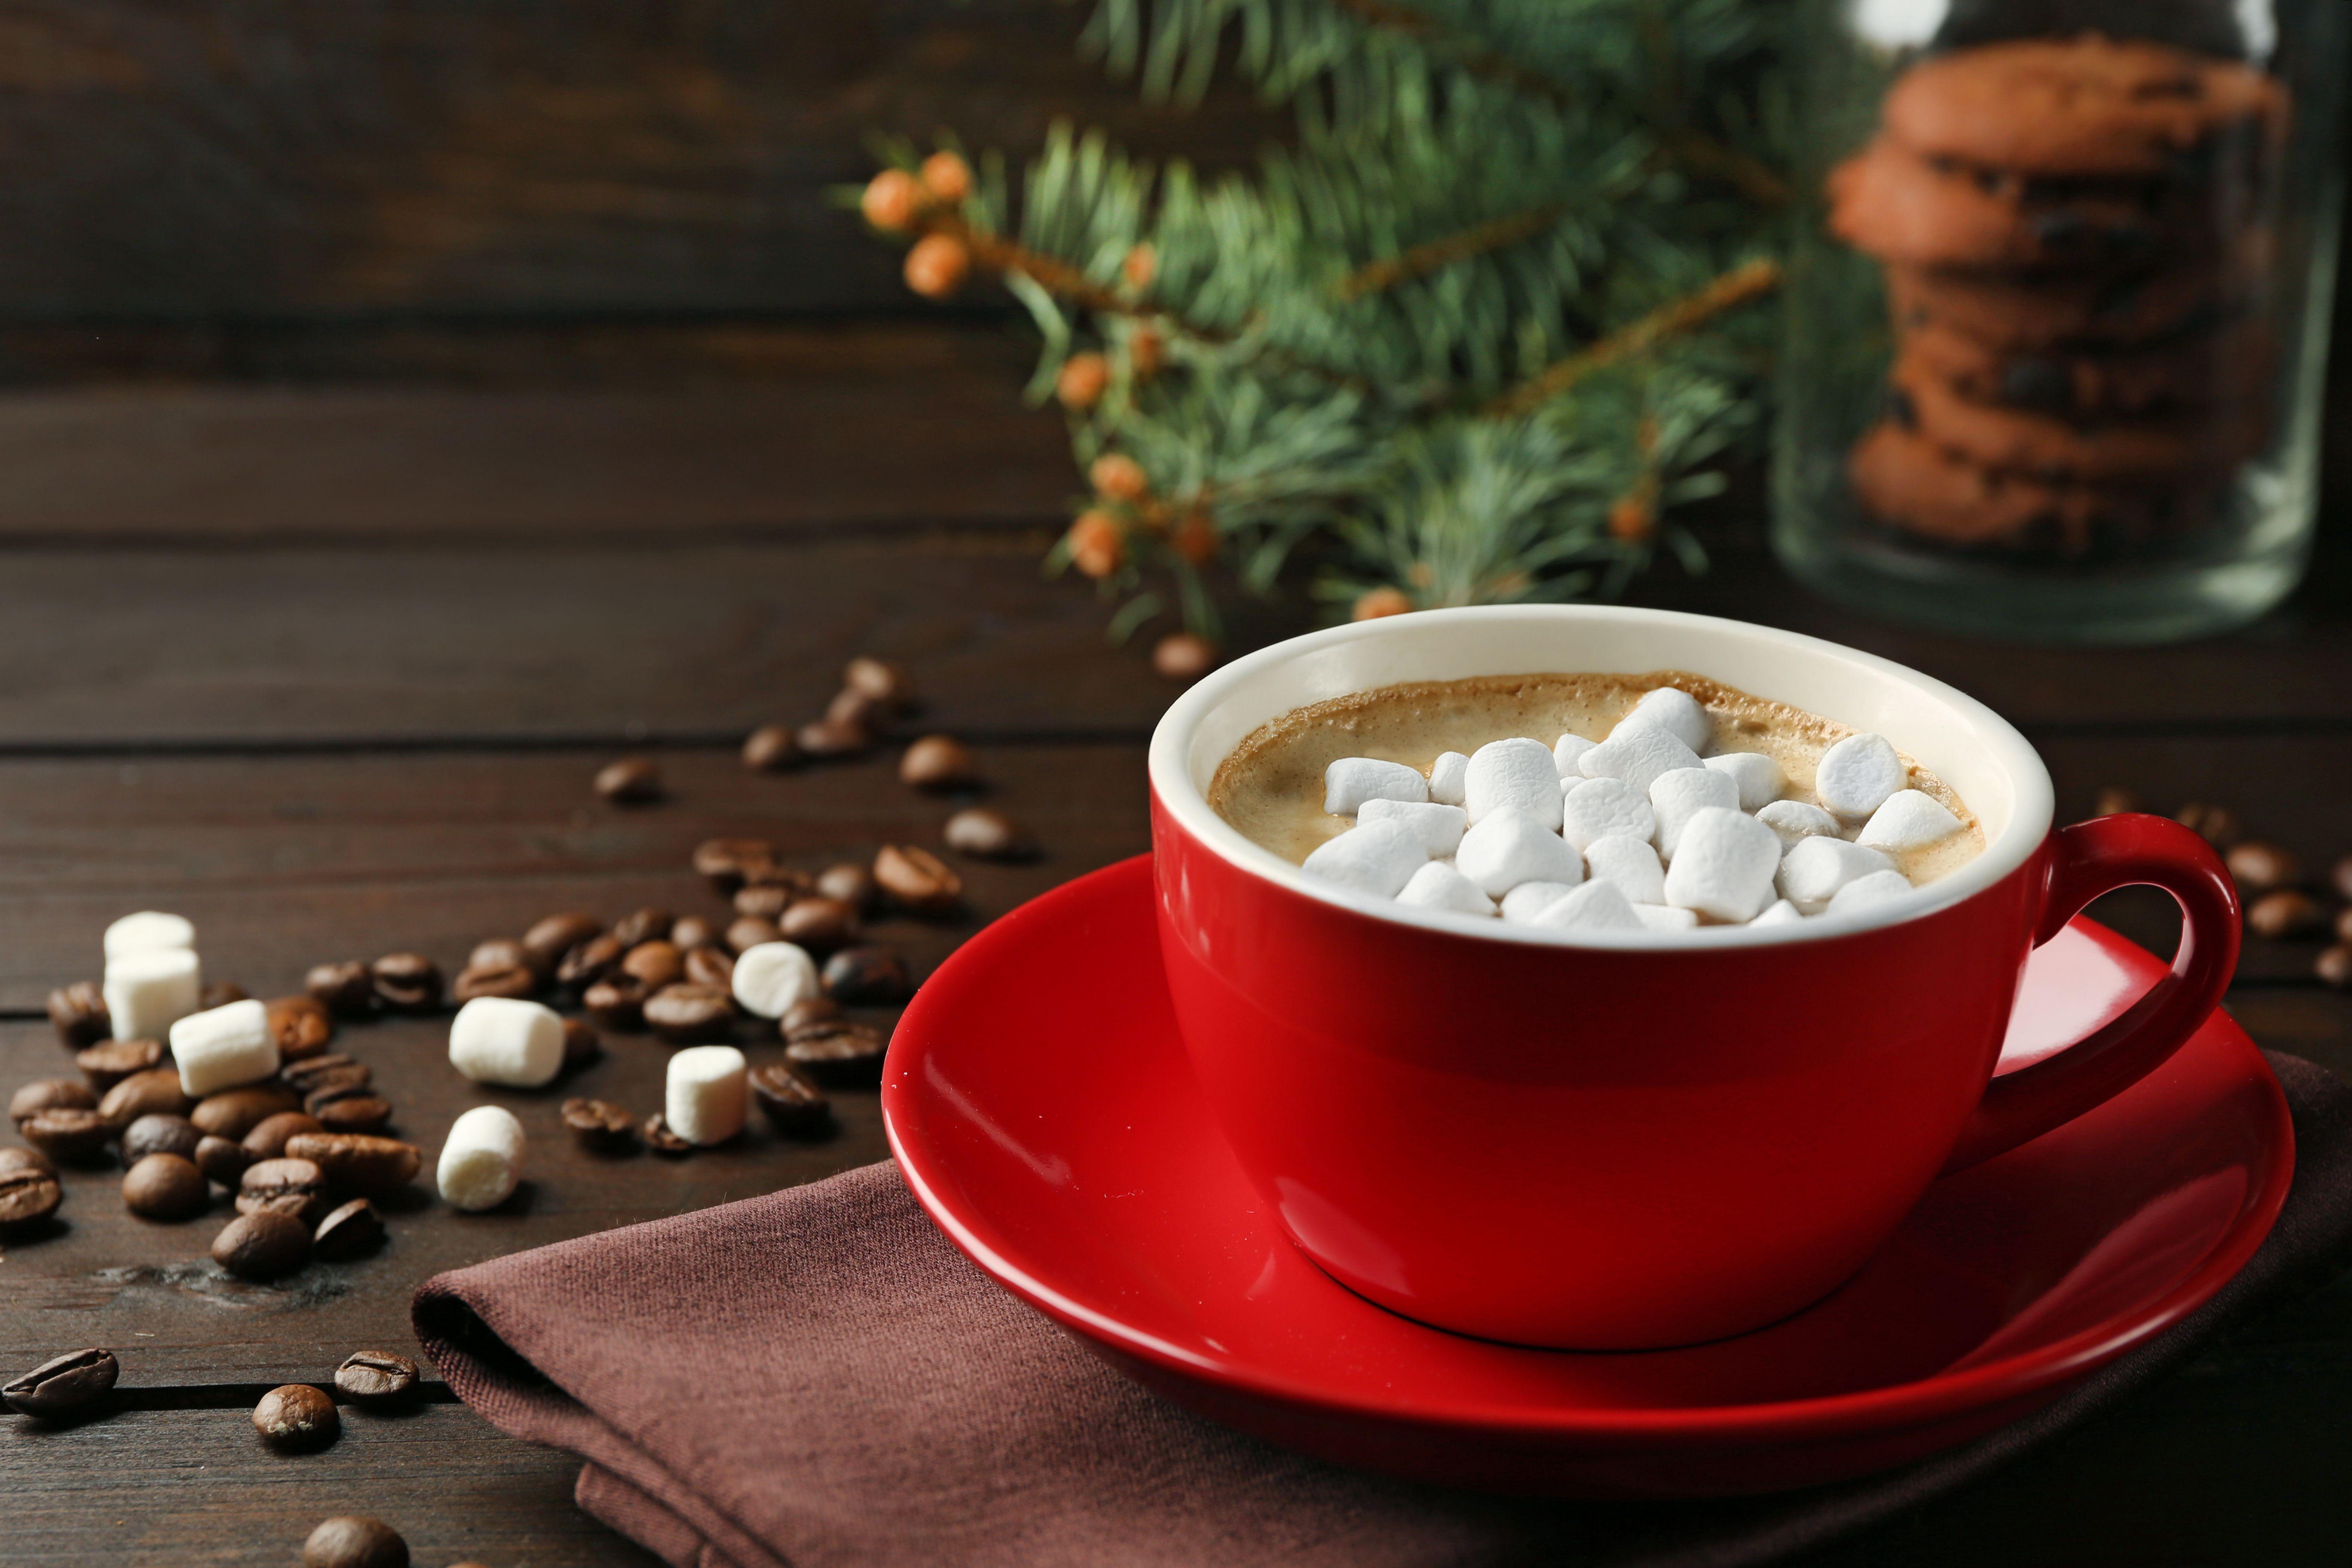 Wallpaper winter snow Cup cup Chocolate hot chocolate marshmallows  images for desktop section настроения  download